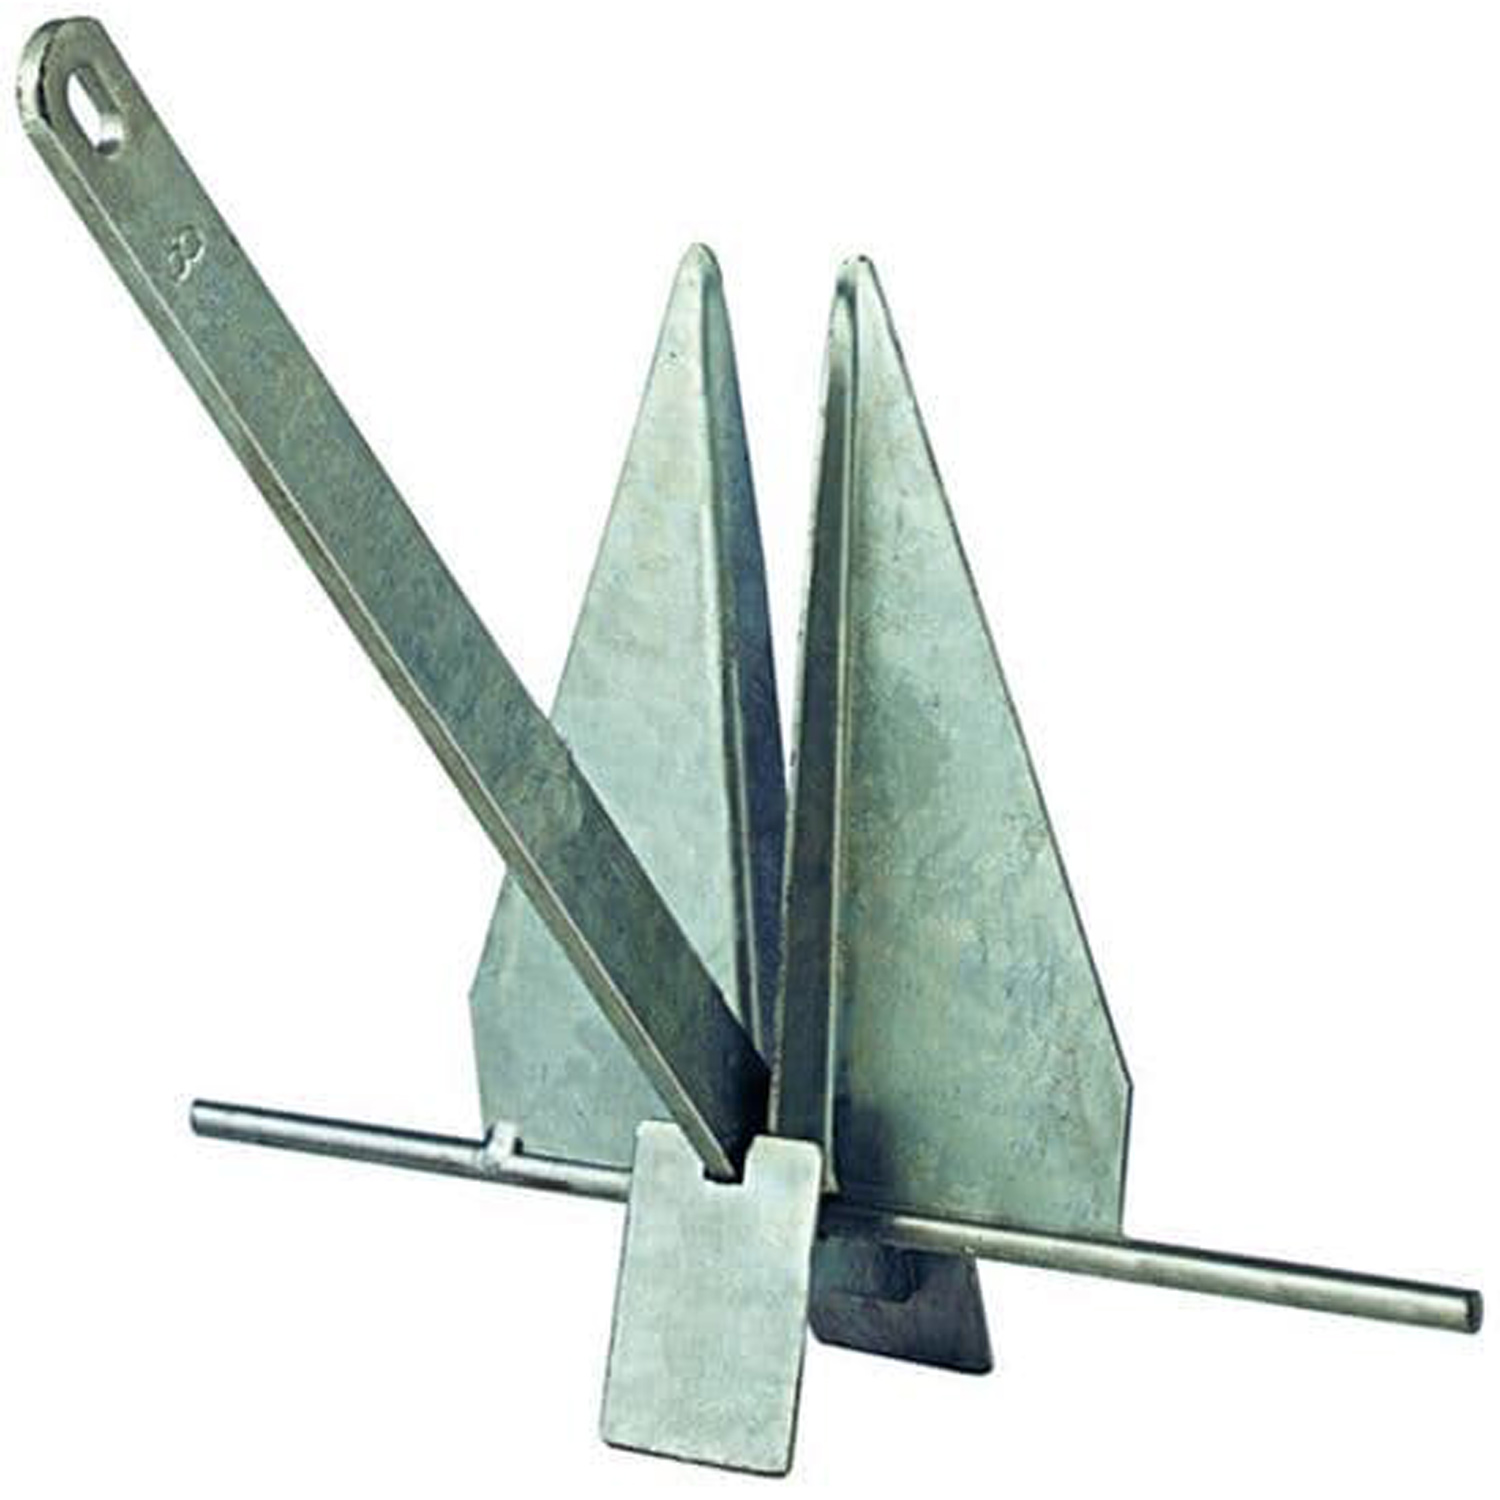 Sentinel 2.5lb / 1.3kg Boat Anchor - For Small Boats / Fishing